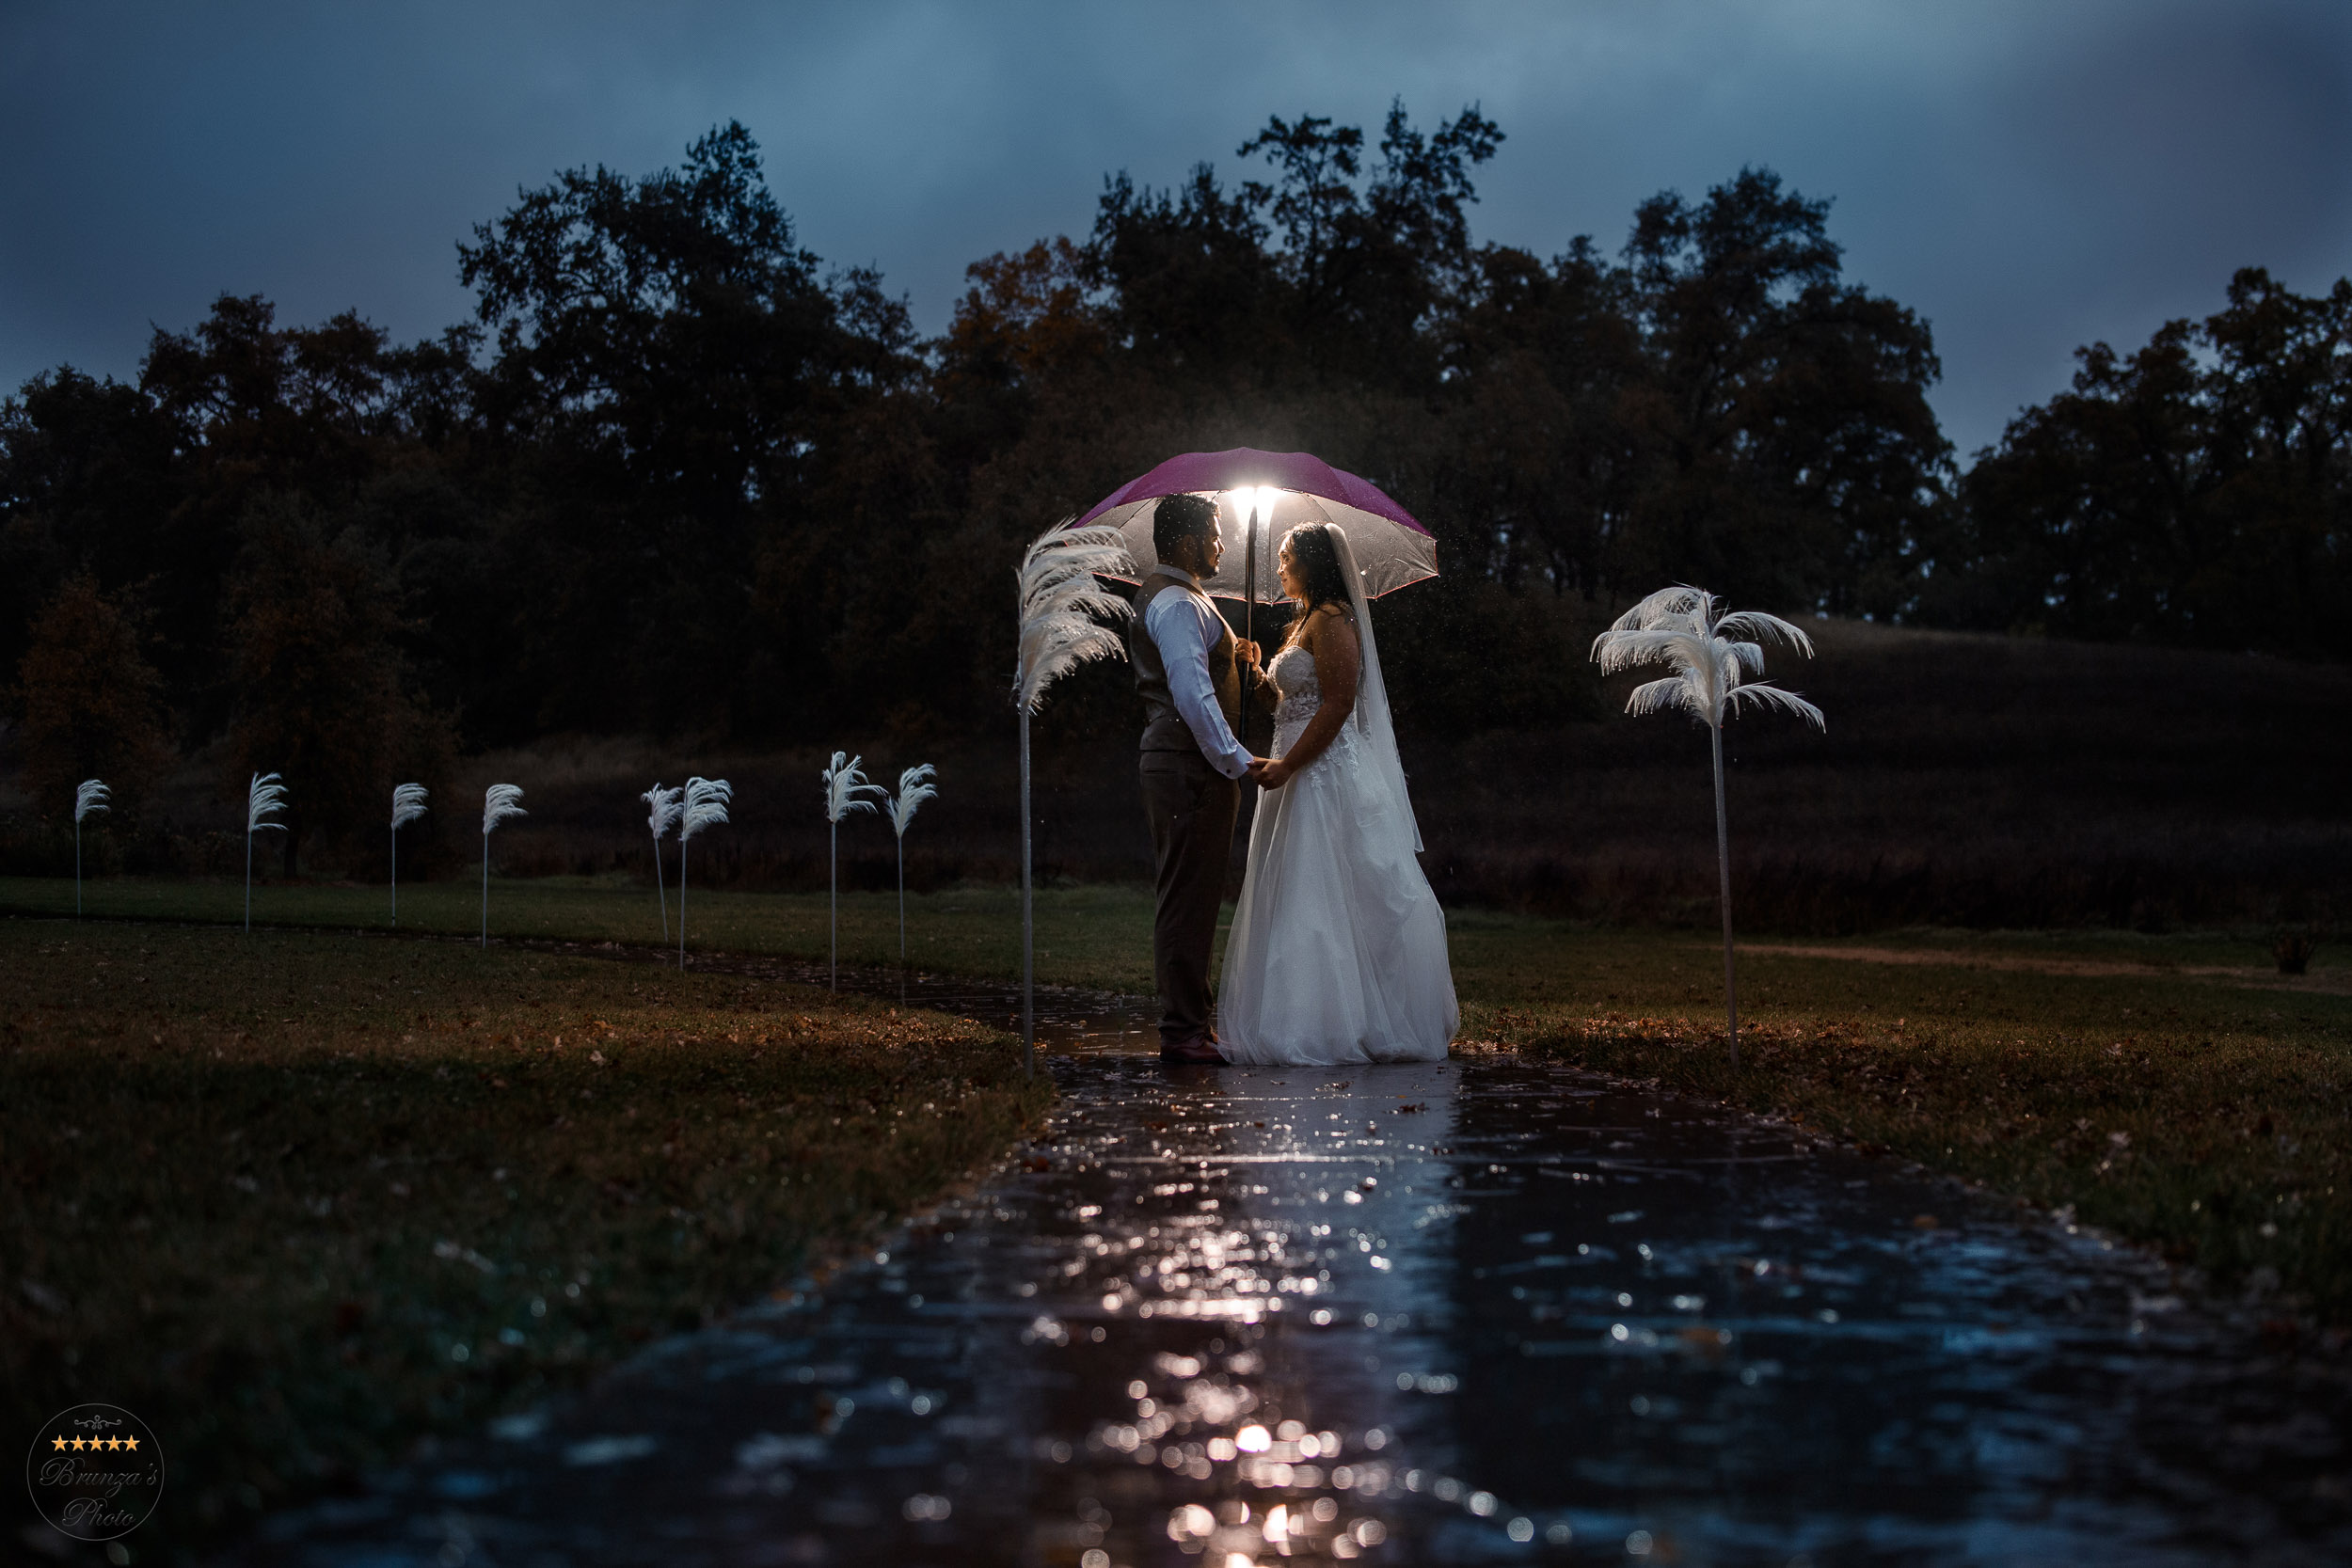 A bride and groom standing under an umbrella in the rain.